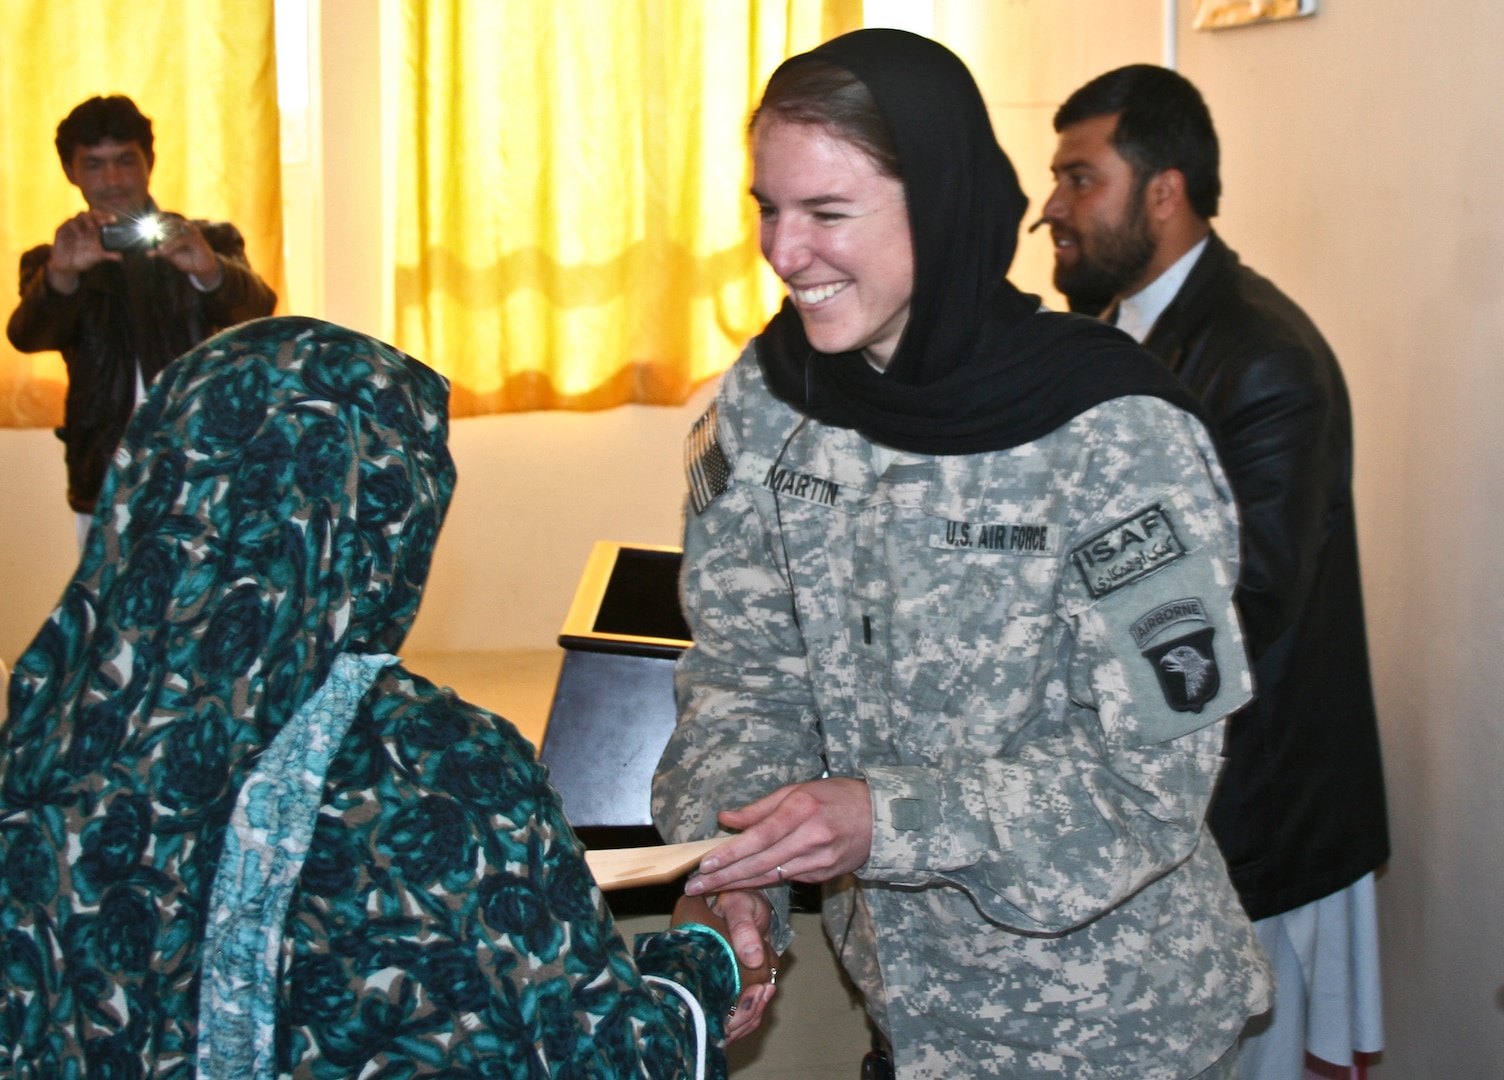 U.S. Air Force 1st Lt. Brittany Martin, right, a public affairs officer with the Laghman Provincial Reconstruction Team, working with 1st Battalion, 133rd Infantry Regiment, Task Force Ironman, which is part of the 2nd Brigade Combat Team, 34th Infantry Division, presents a certificate to an Afghan journalism seminar participant at the Information, Culture and Youth Center in Mehtar Lam, Laghman province, Afghanistan, Feb. 23, 2011. (DoD photo by Staff Sgt. Ryan C. Matson, U.S. Army/Released)